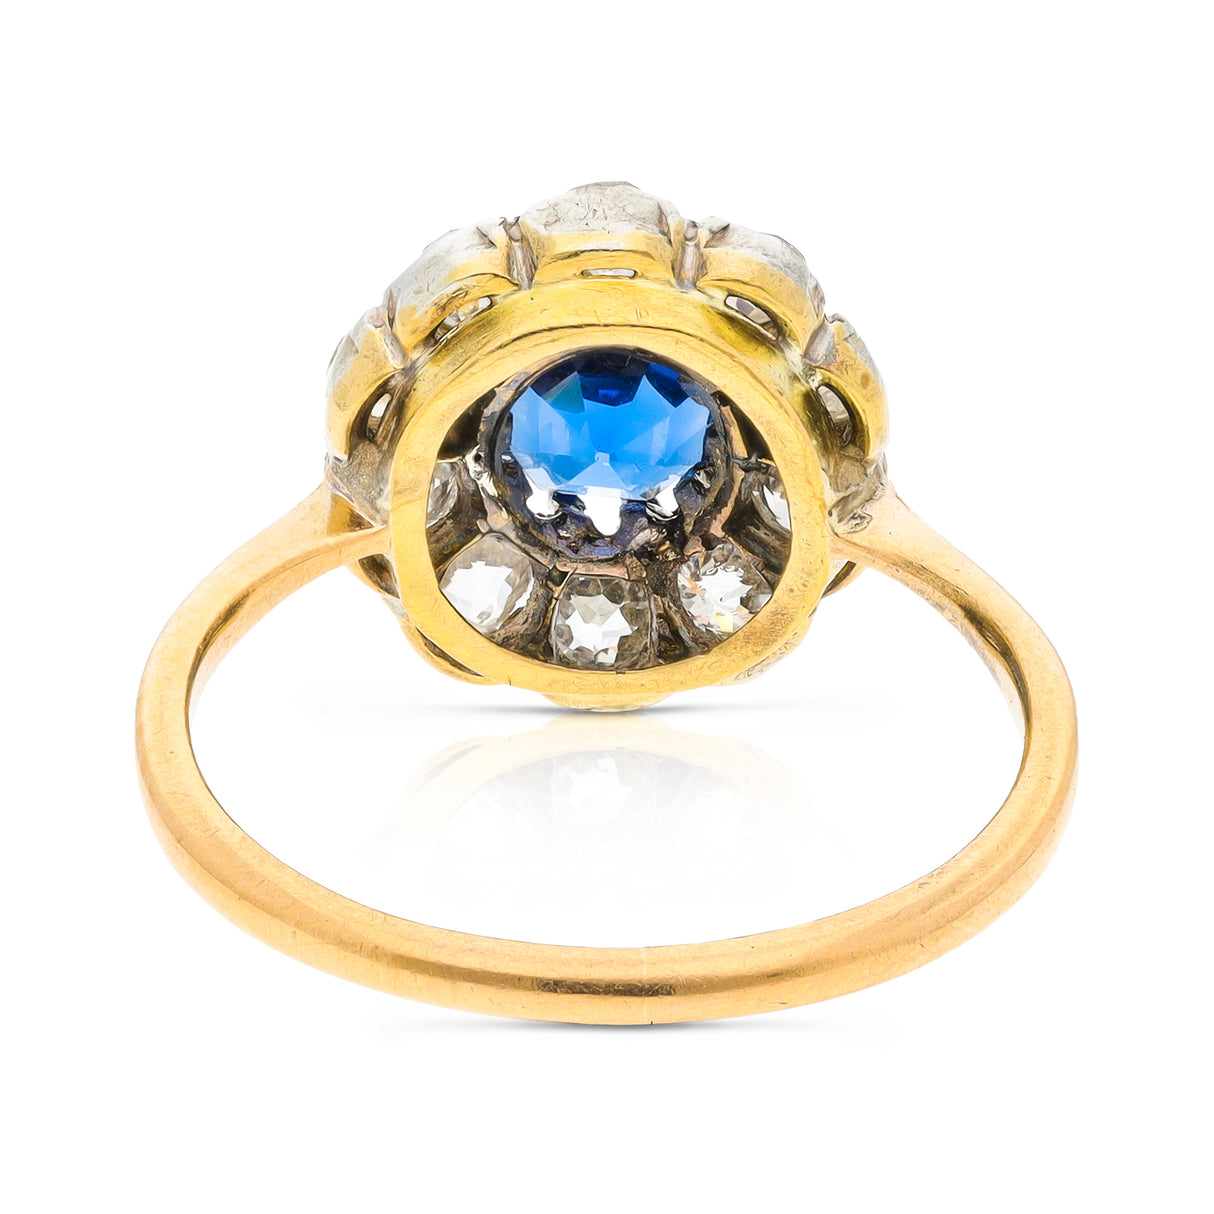 Antique Sapphire and Diamond Daisy Cluster Ring, 18ct Yellow Gold, Platinum